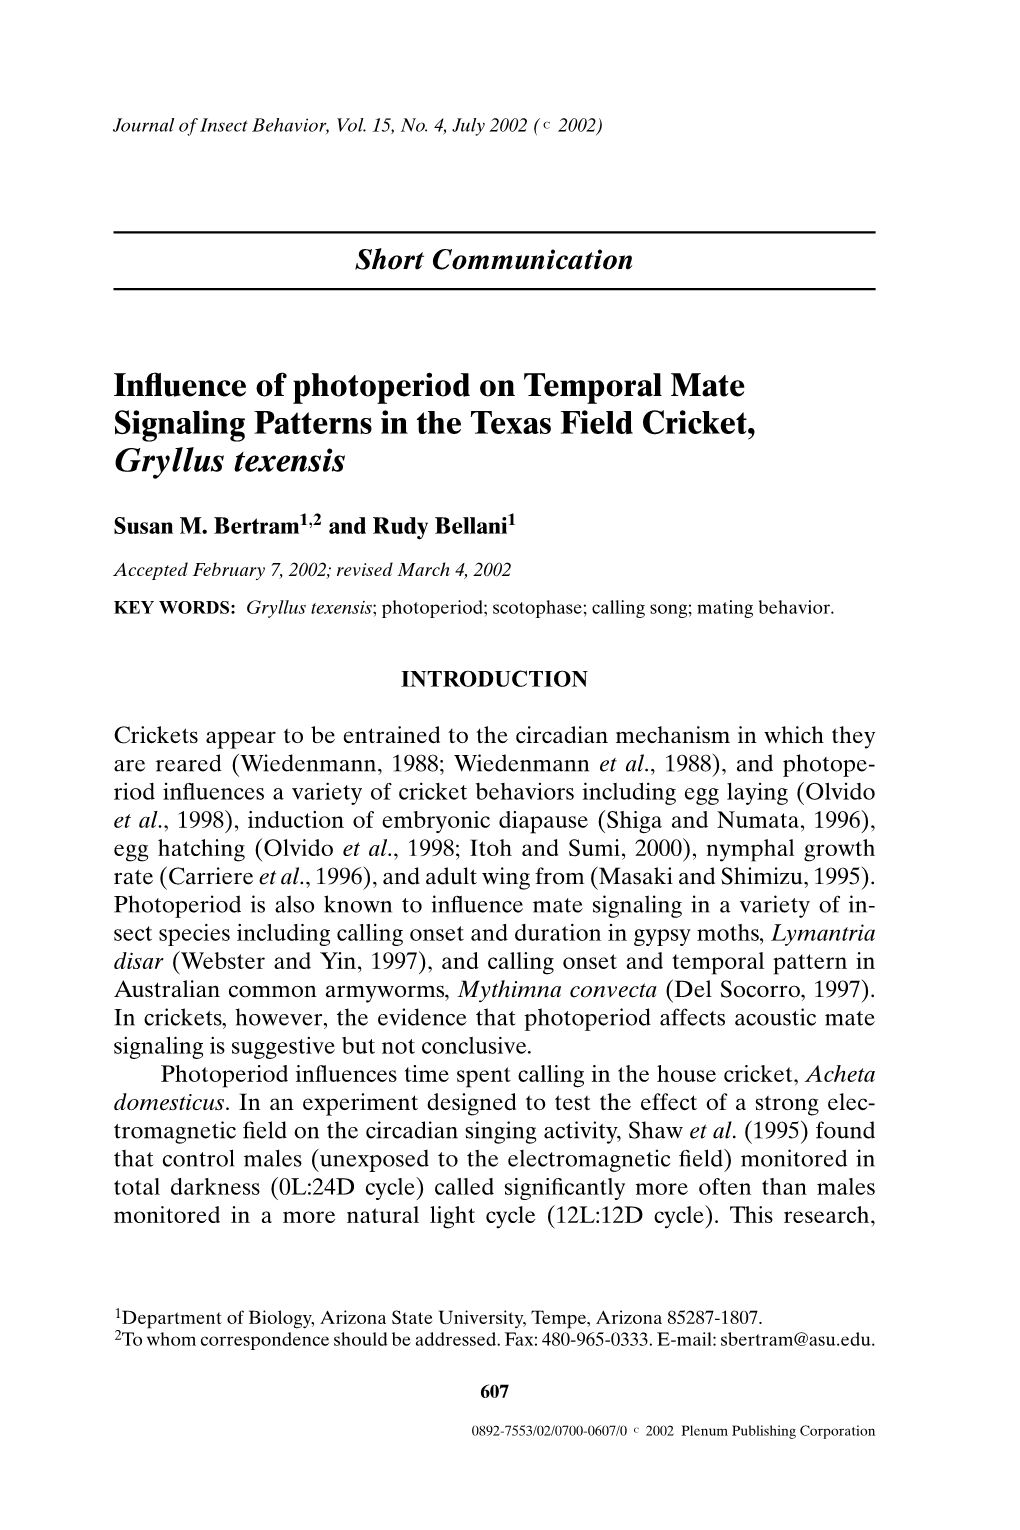 Influence of Photoperiod on Temporal Mate Signaling Patterns in The